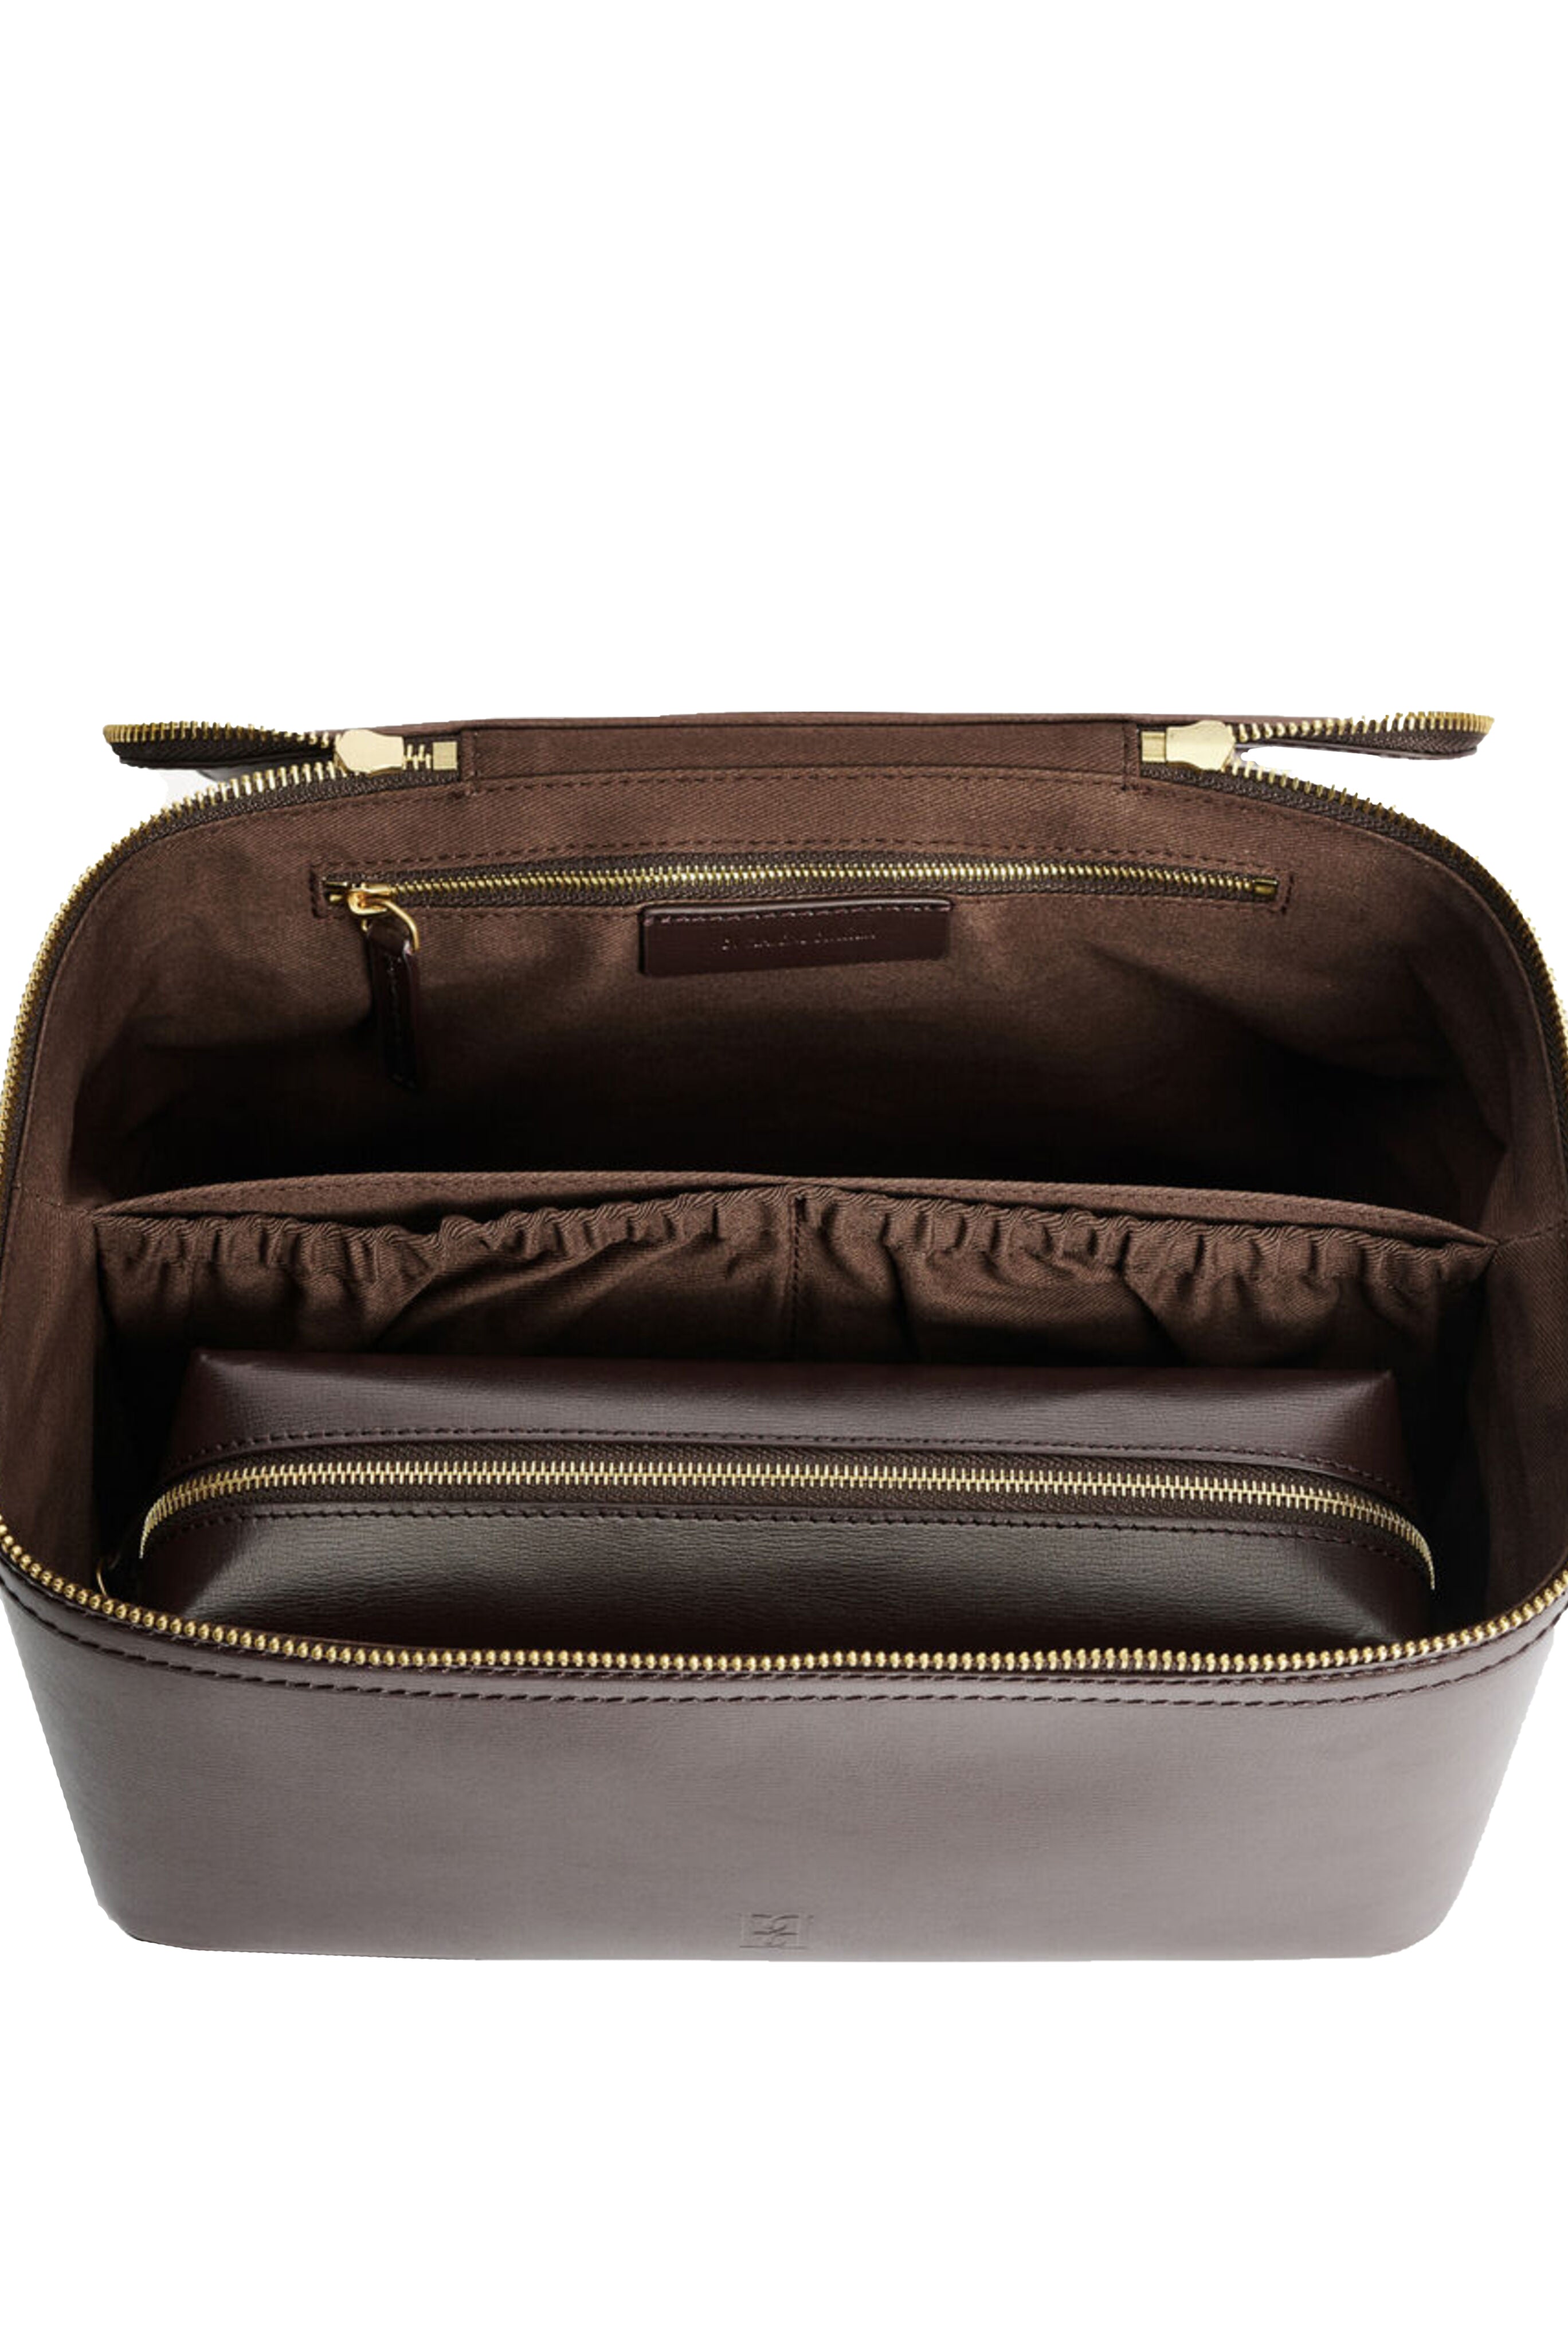 BY MALENE BIRGER Aya Brown Leather Beauty Travel Case